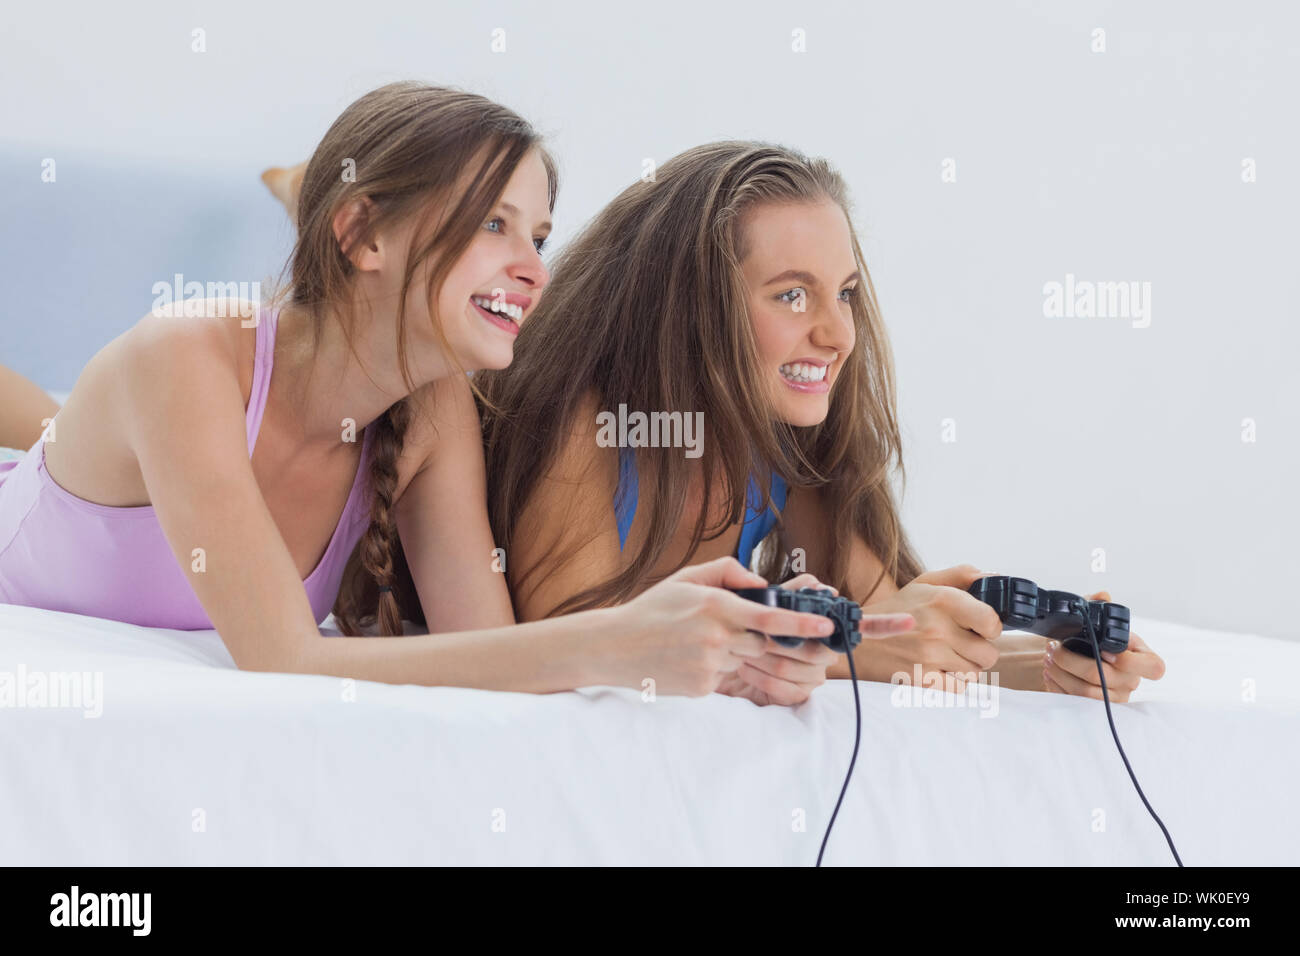 Girls playing themselves